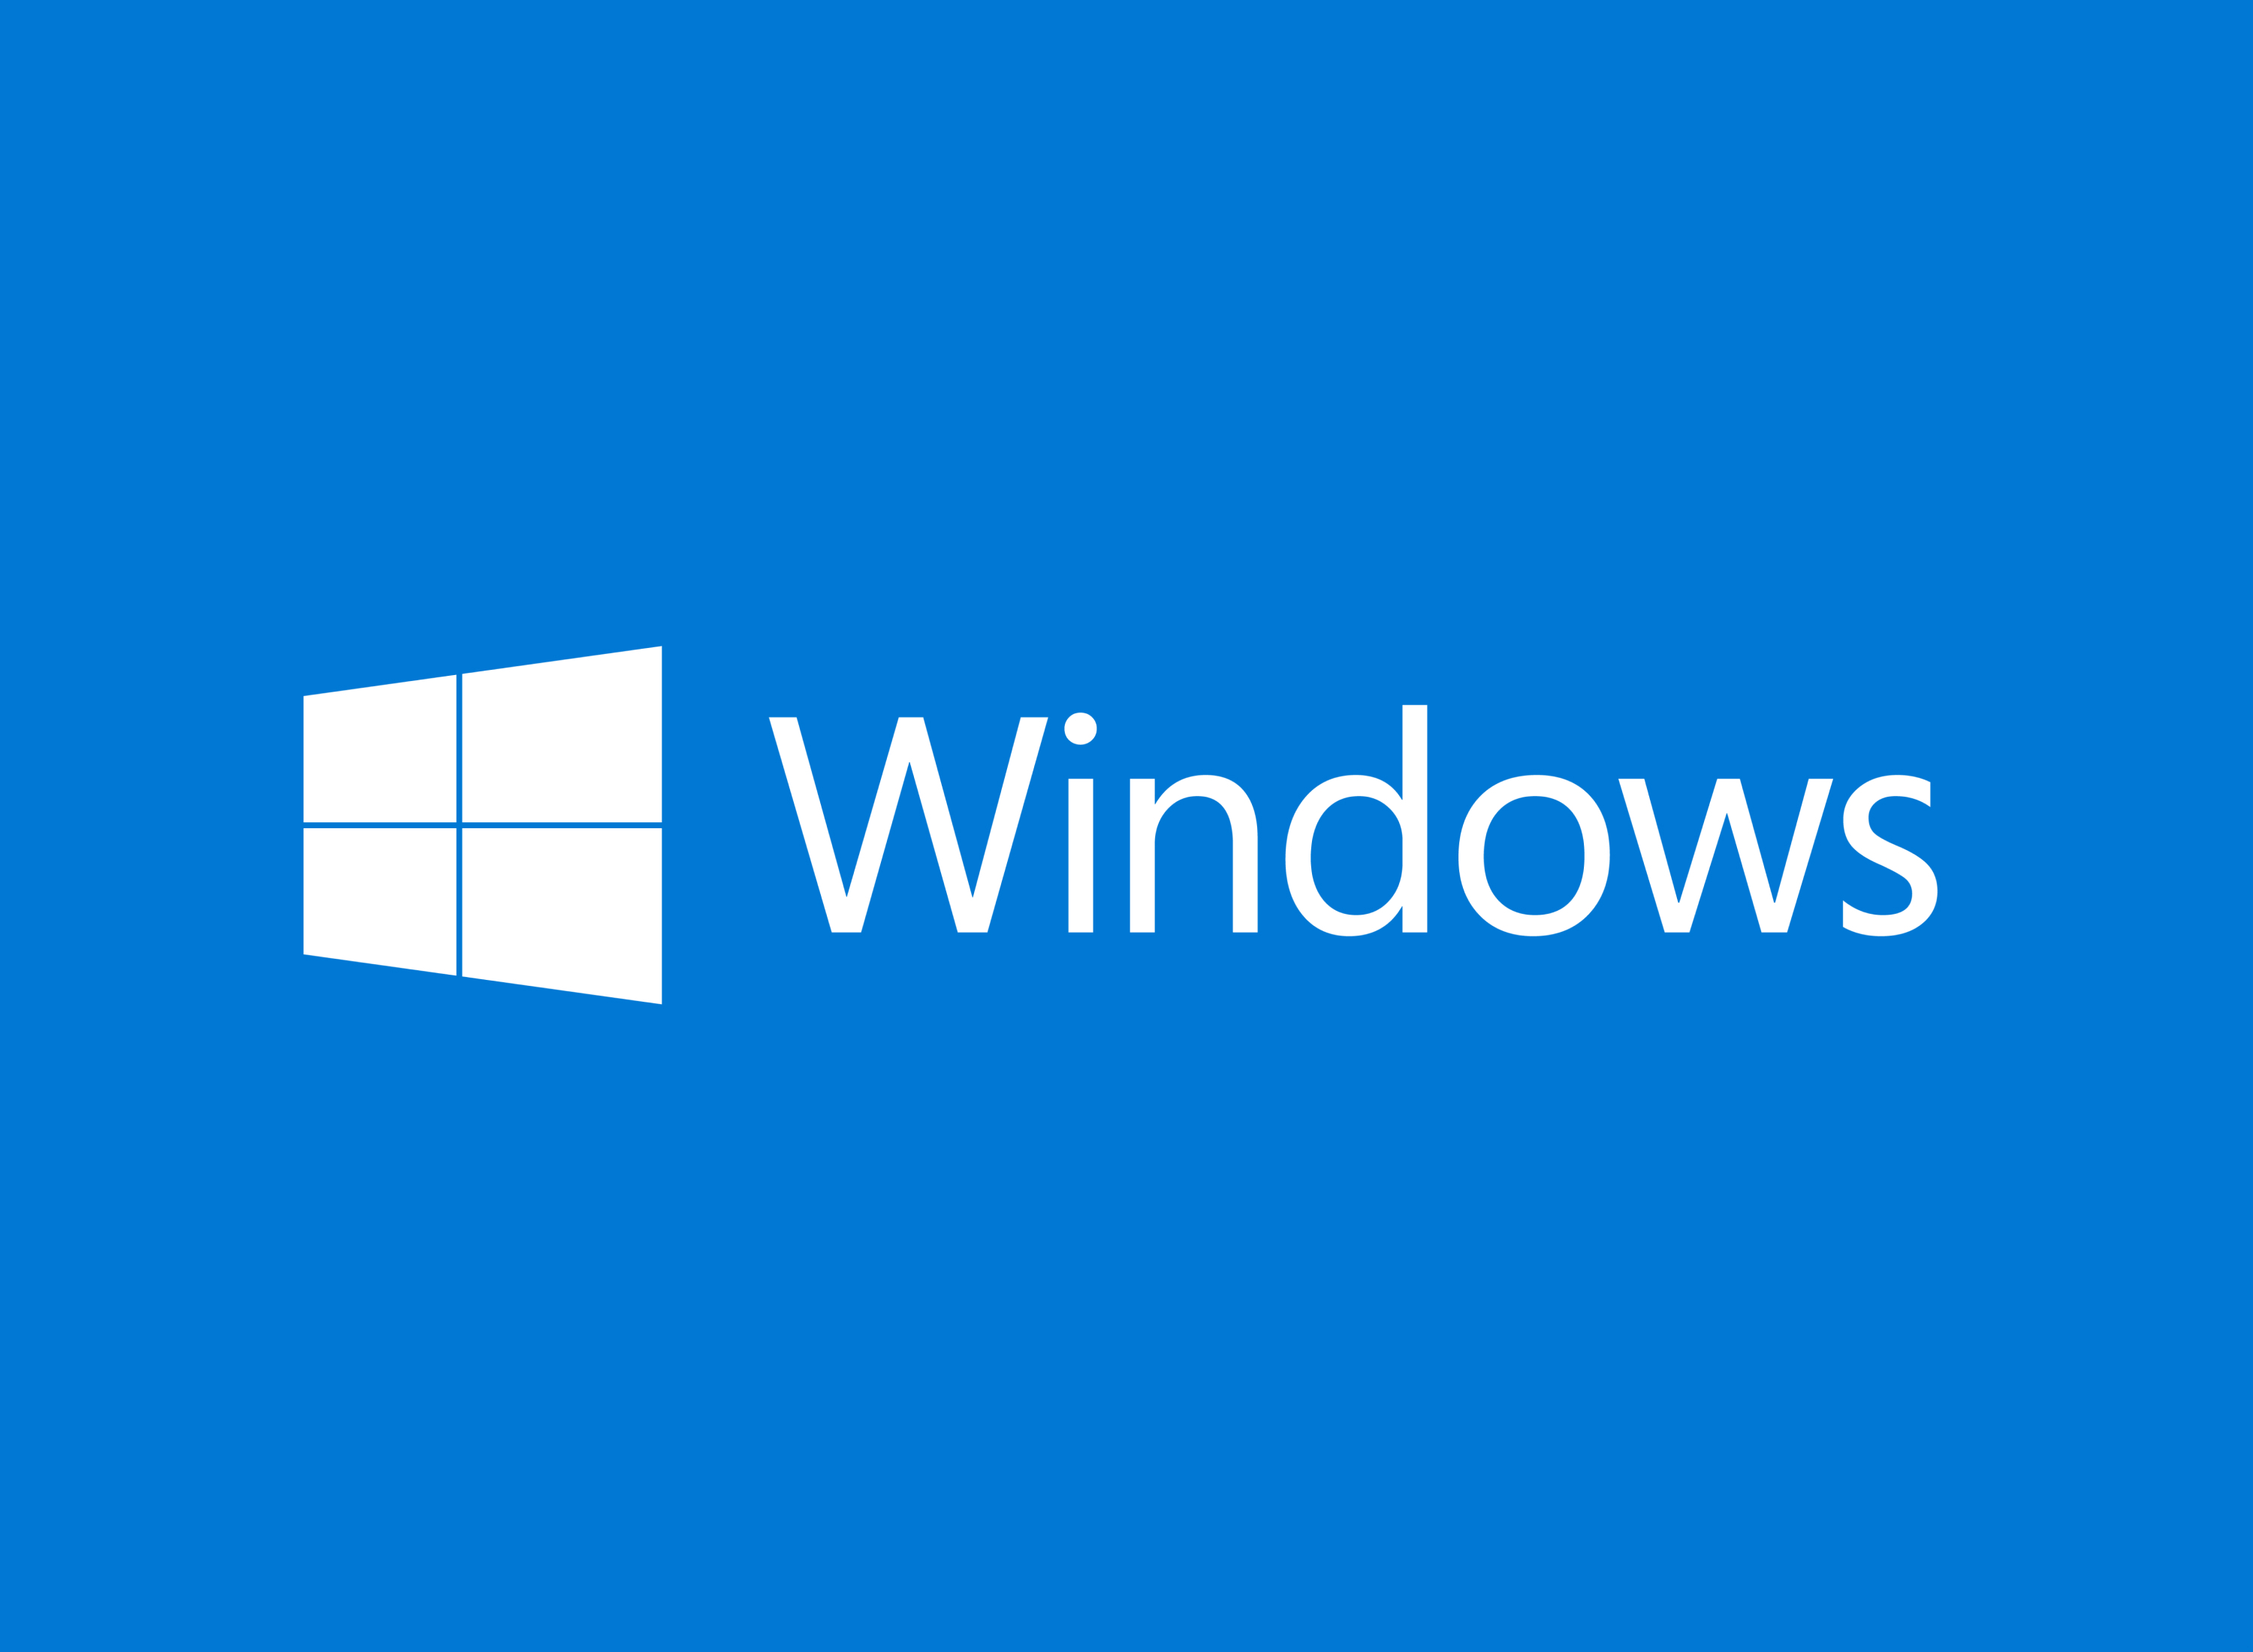 Preparing the Windows 10 October 2020 Update Ready for Release